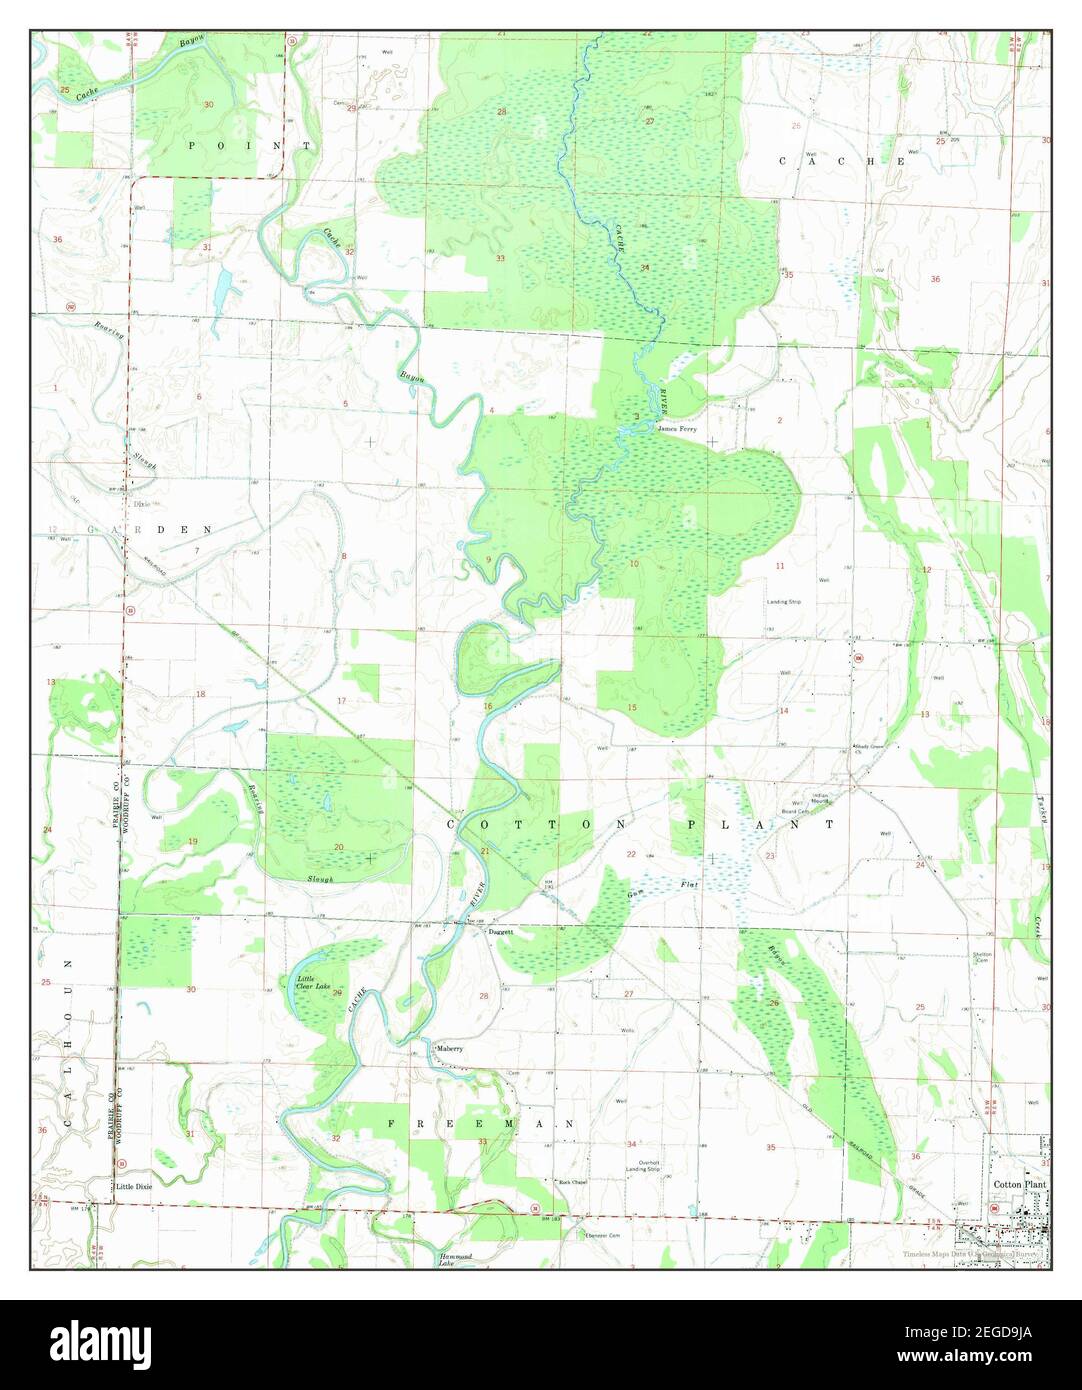 Cotton Plant, Arkansas, map 1968, 1:24000, United States of America by Timeless Maps, data U.S. Geological Survey Stock Photo